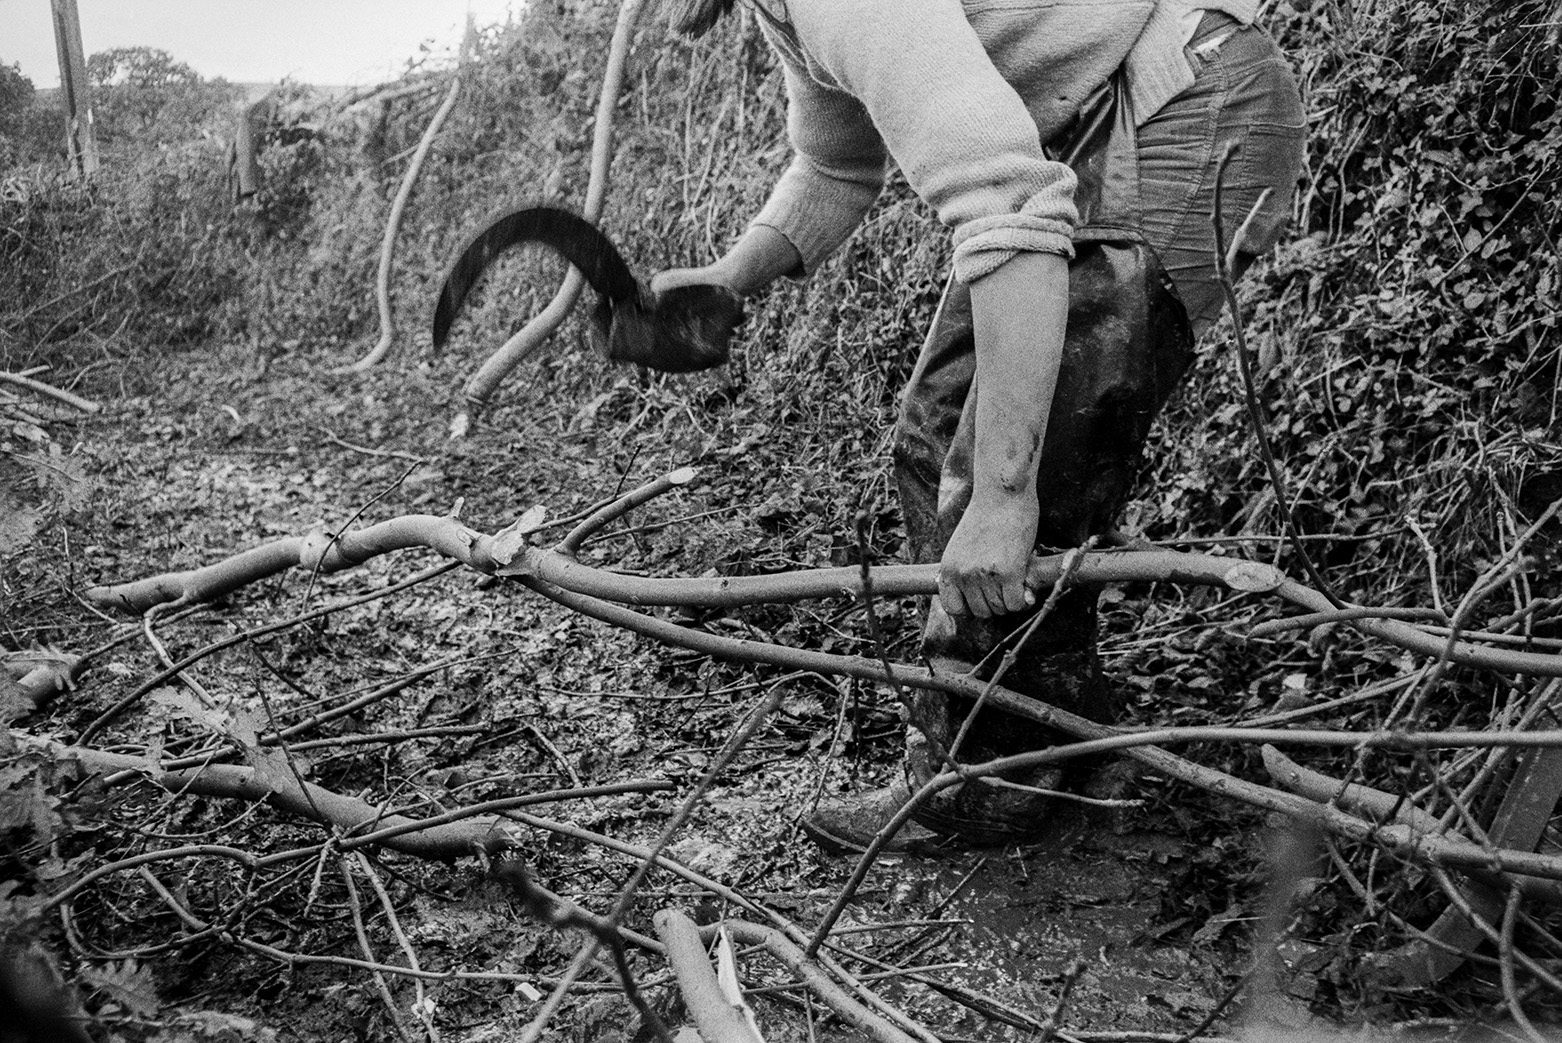 Derek Bright cutting crooks from hedge cuttings with a bill hook, possibly in Green Lane at Beaford. He is wearing protective clothing over his legs.